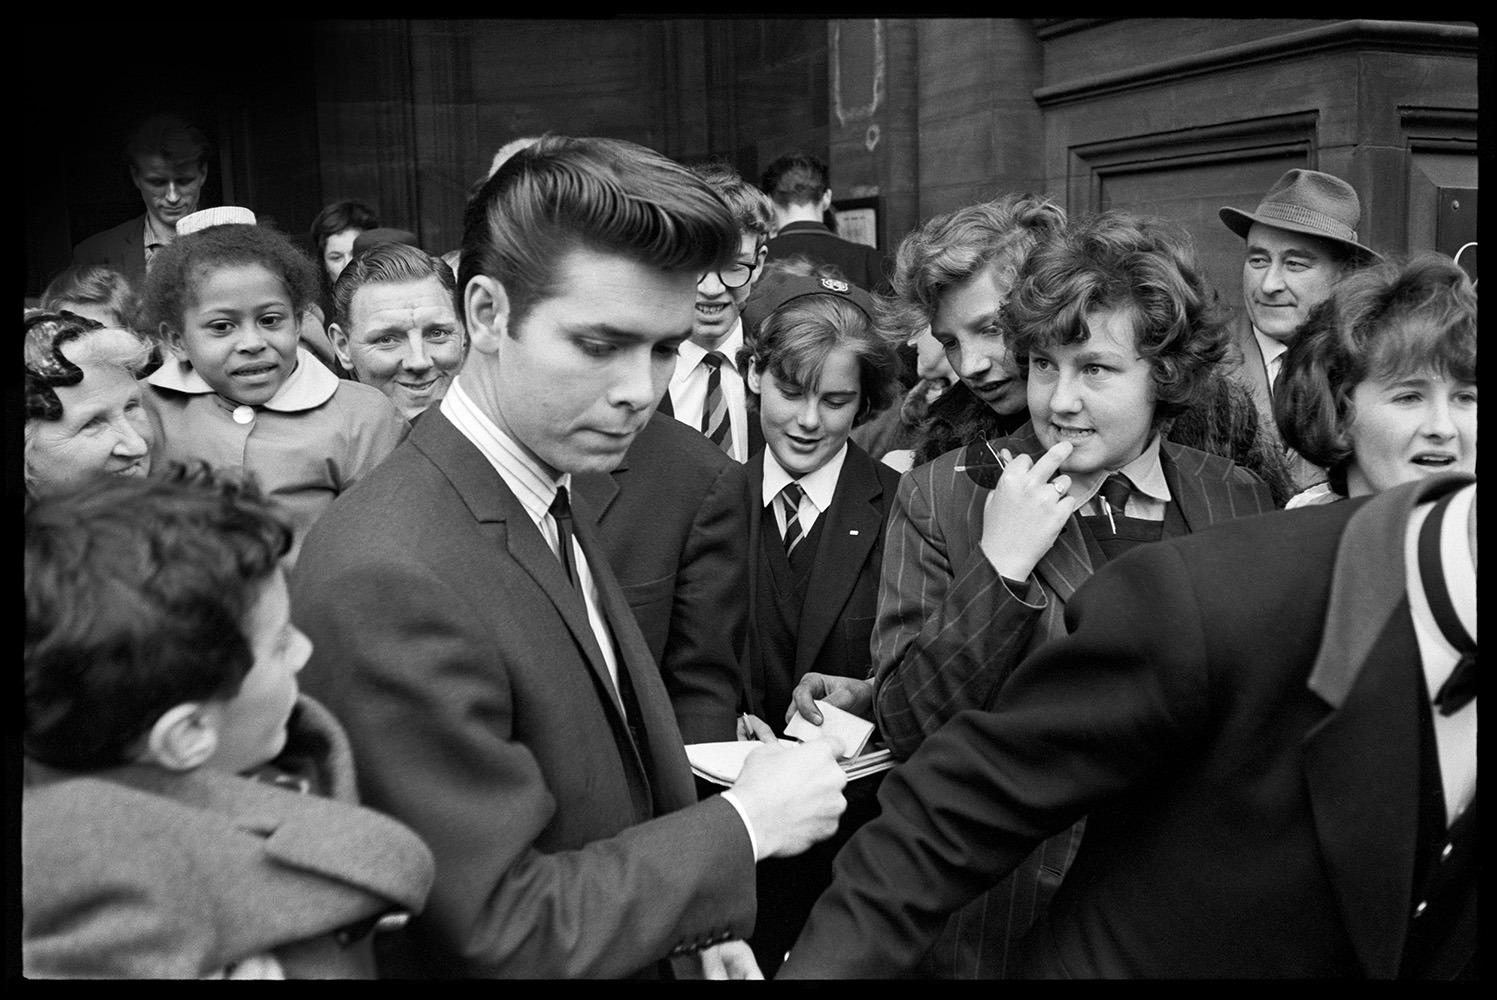 David Steen Black and White Photograph - Cliff Richard – Signing Autographs, on Tour, April, 1964 Limited Estate Print 